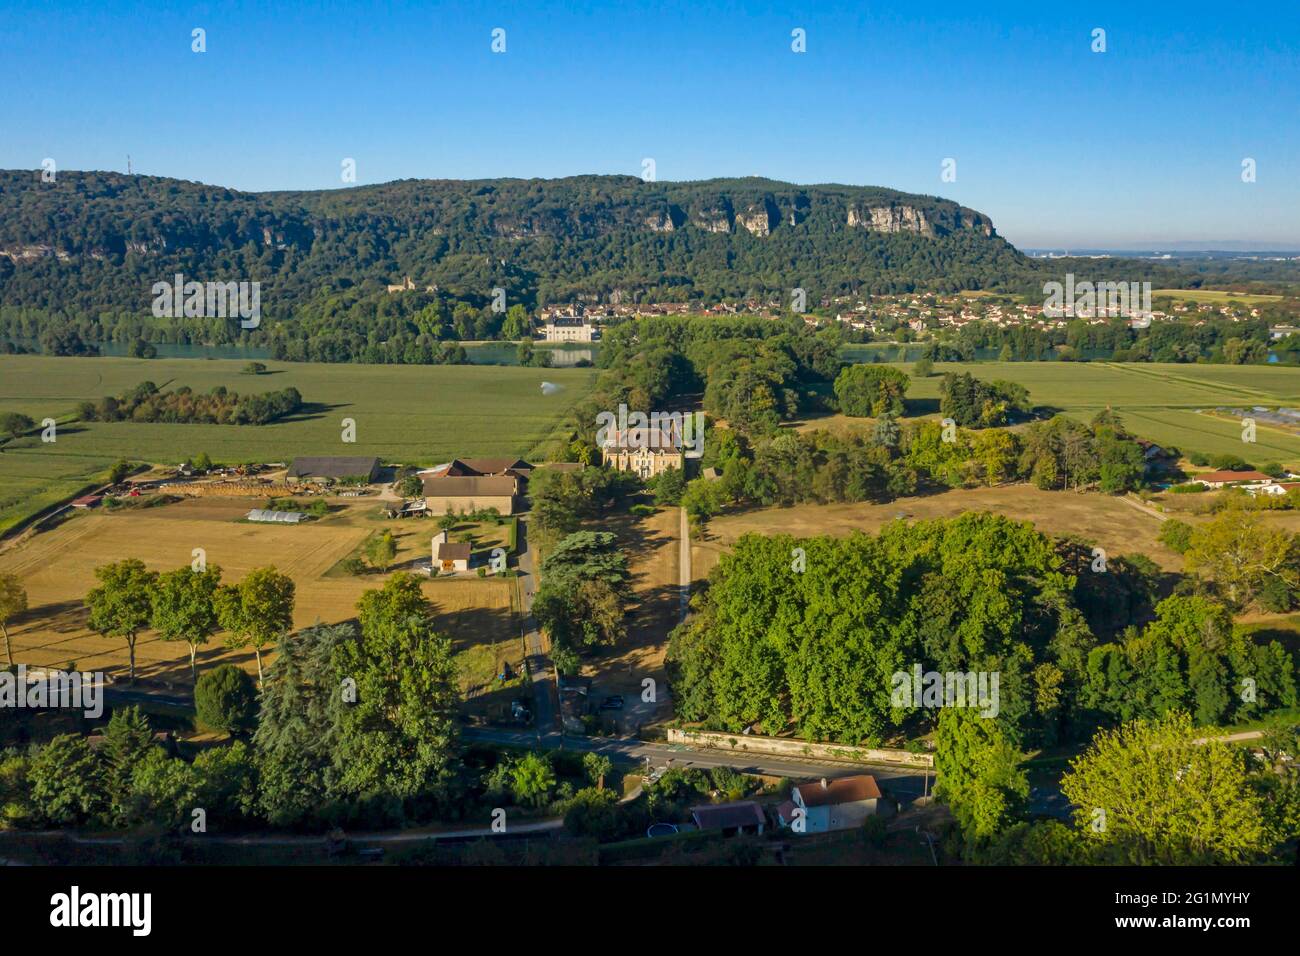 France, Ain, the Rhone valley from the village of Saint-Sorlin-en-Bugey (aerial view) Stock Photo